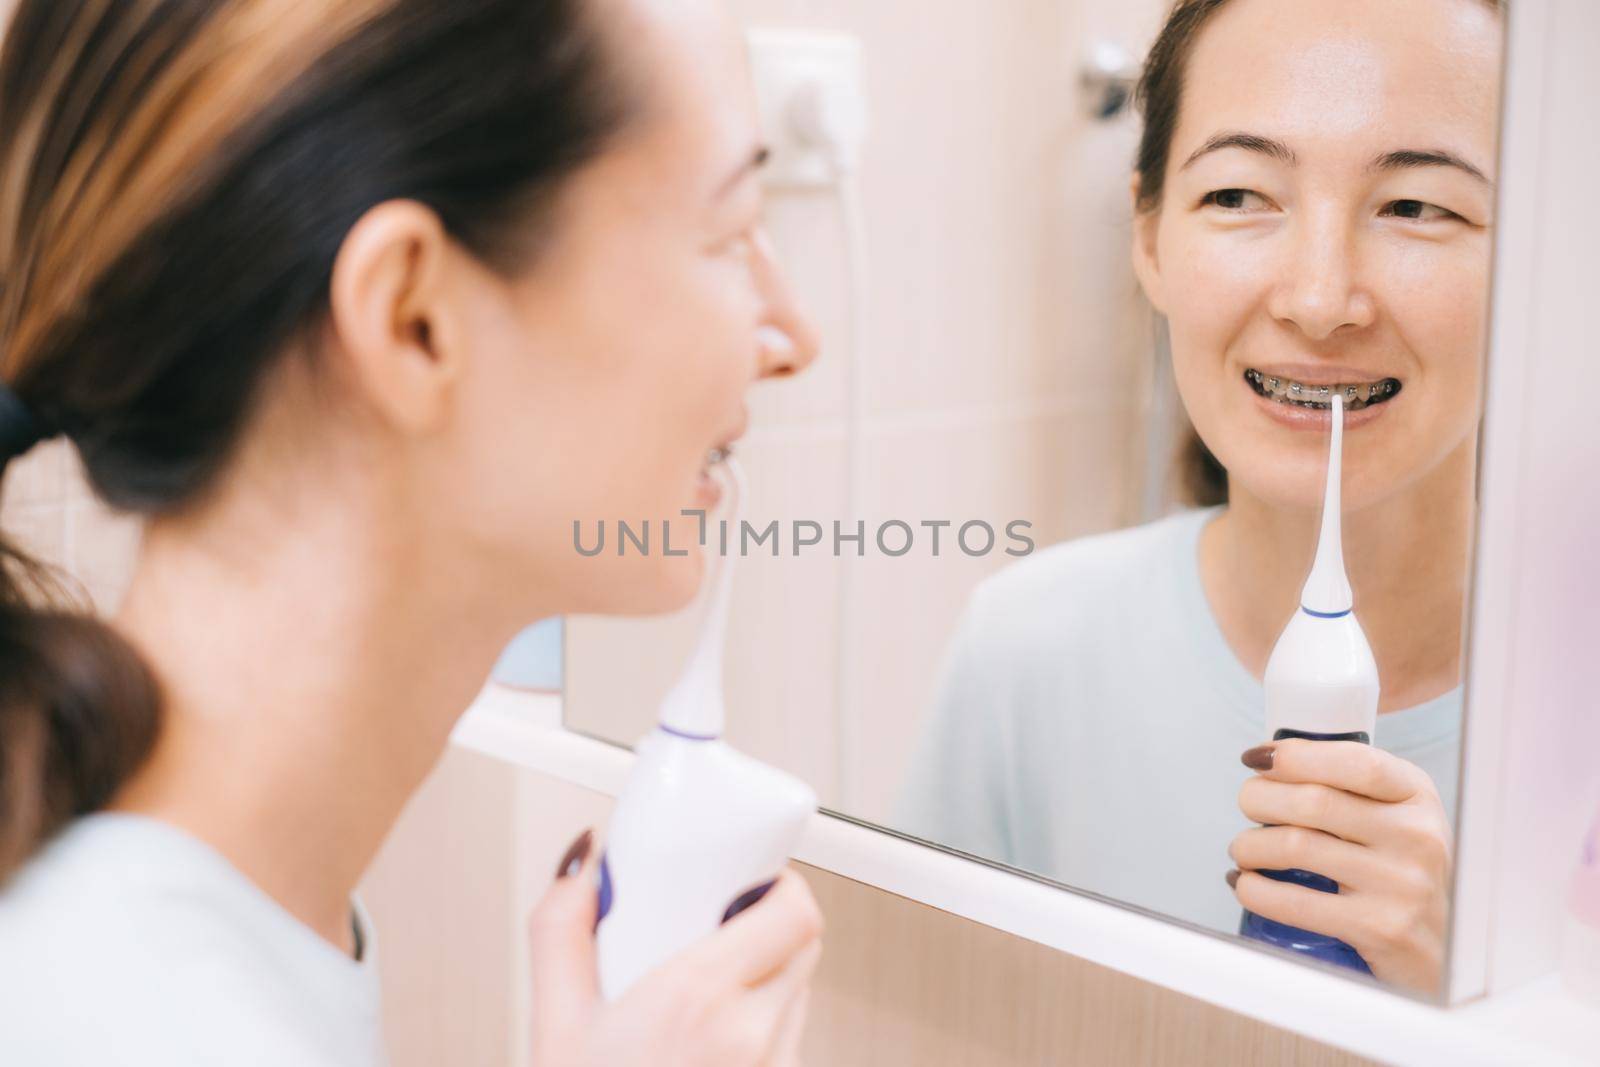 Young woman with braces on her teeth brushing her teeth with by using a irrigate, before mirror. Dental and oral care.